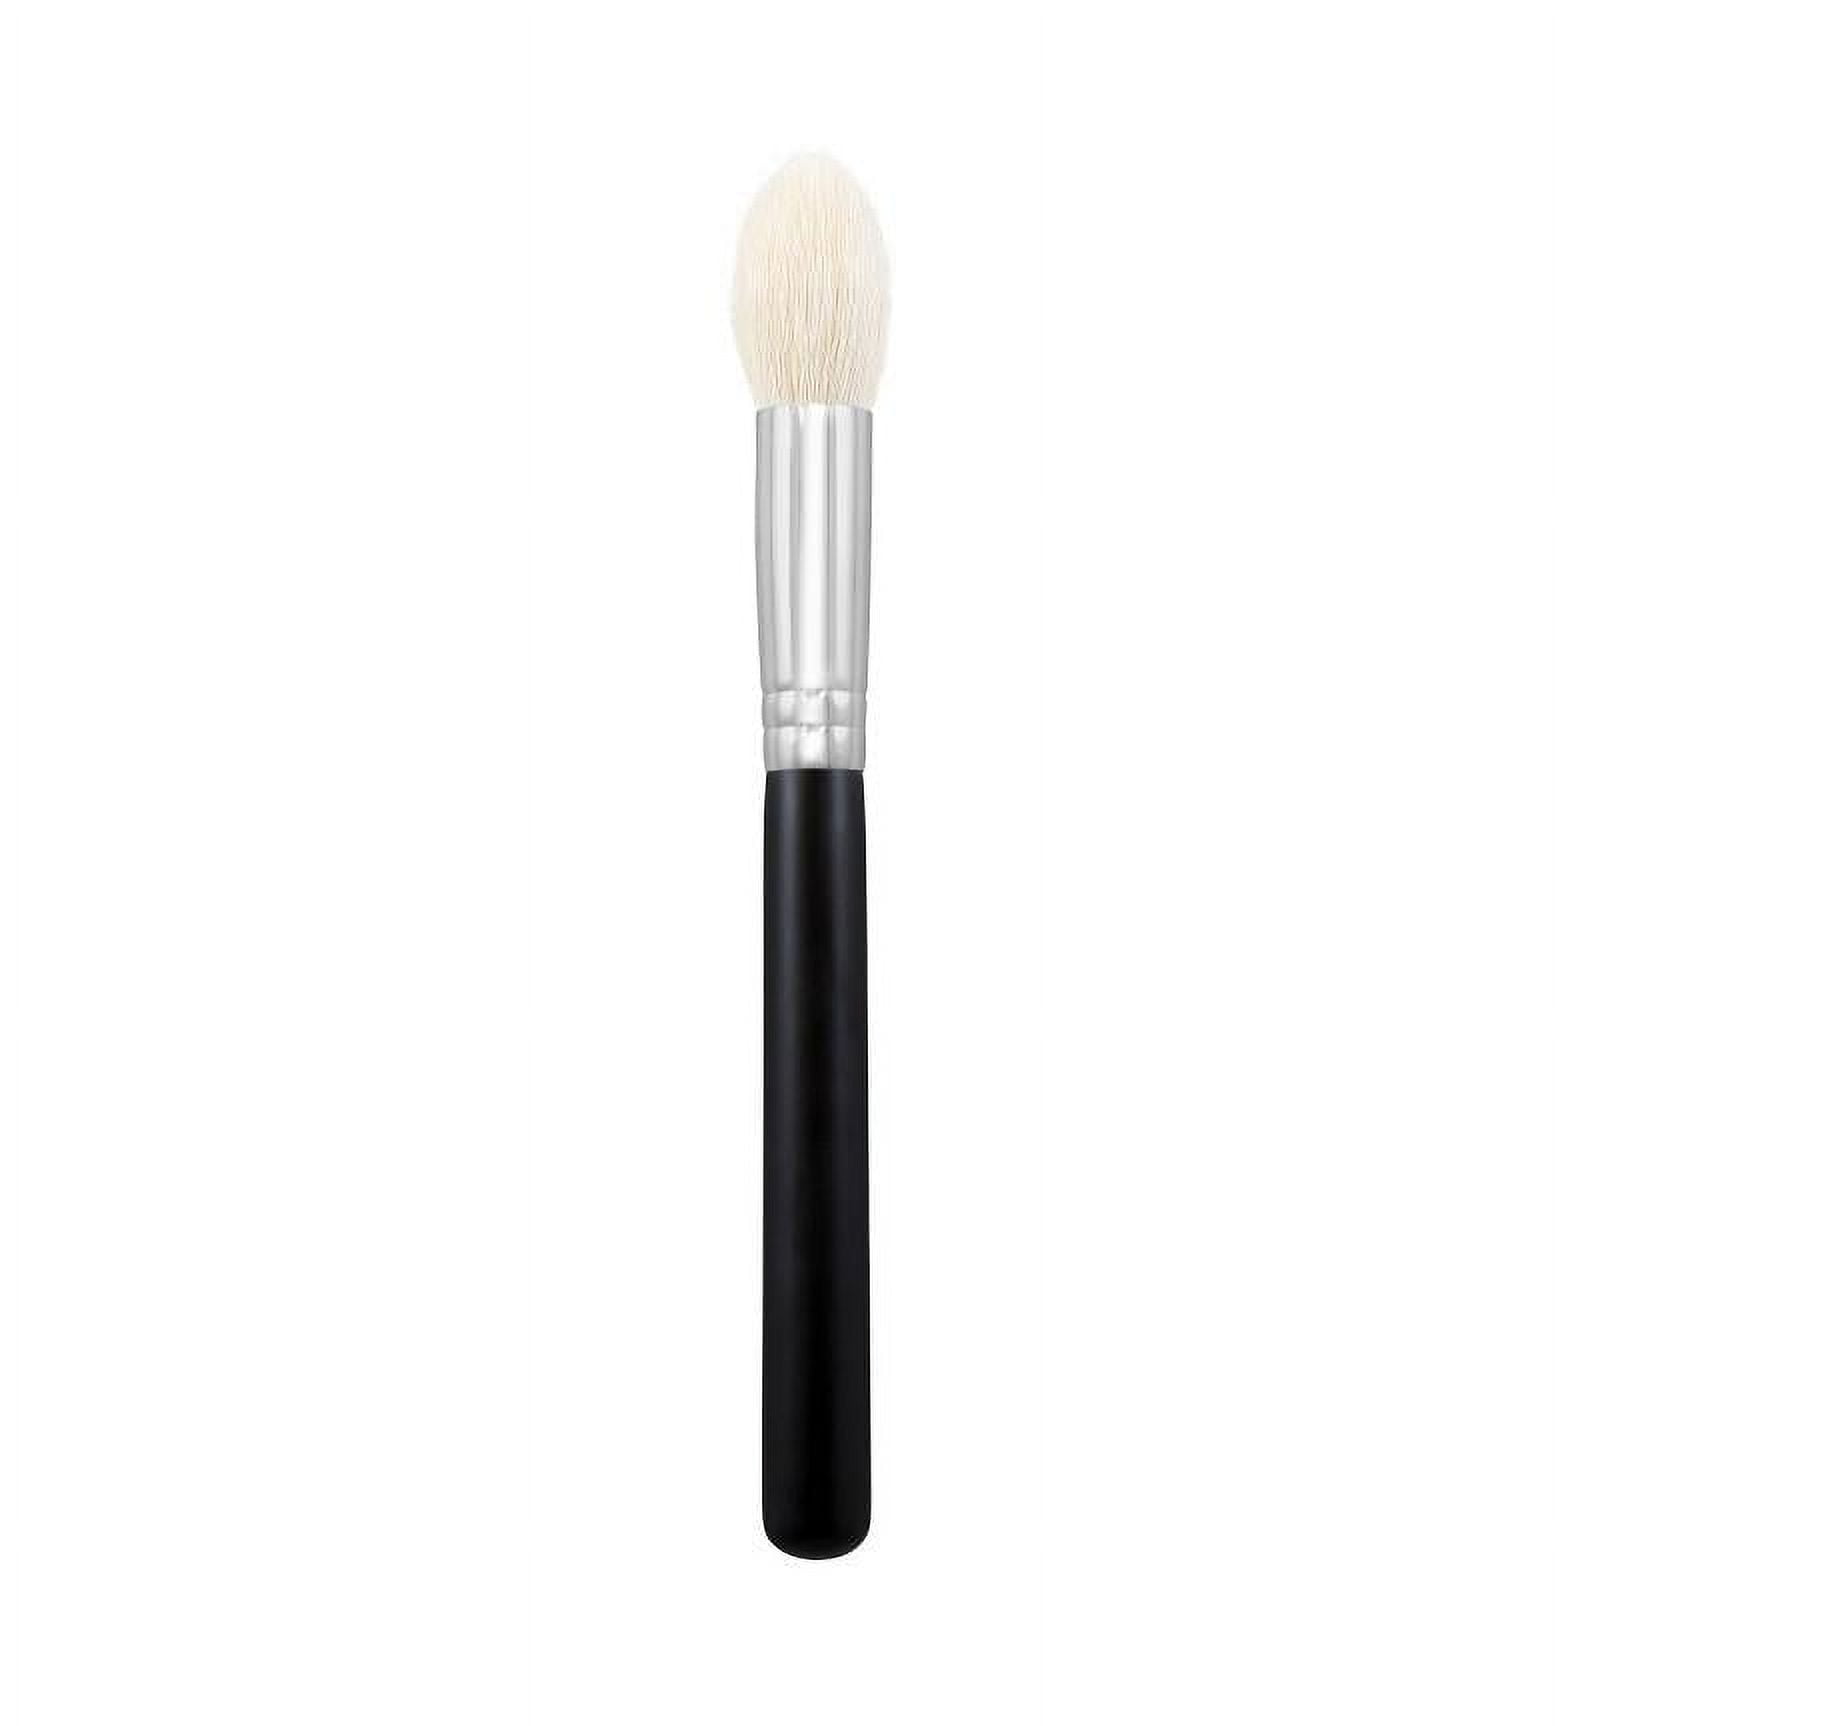 Narrative Cosmetics Solid Makeup Brush Cleanser Soap for Cosmetic Brushes with Silicone Cleaning Pad - Vanilla Fragrance